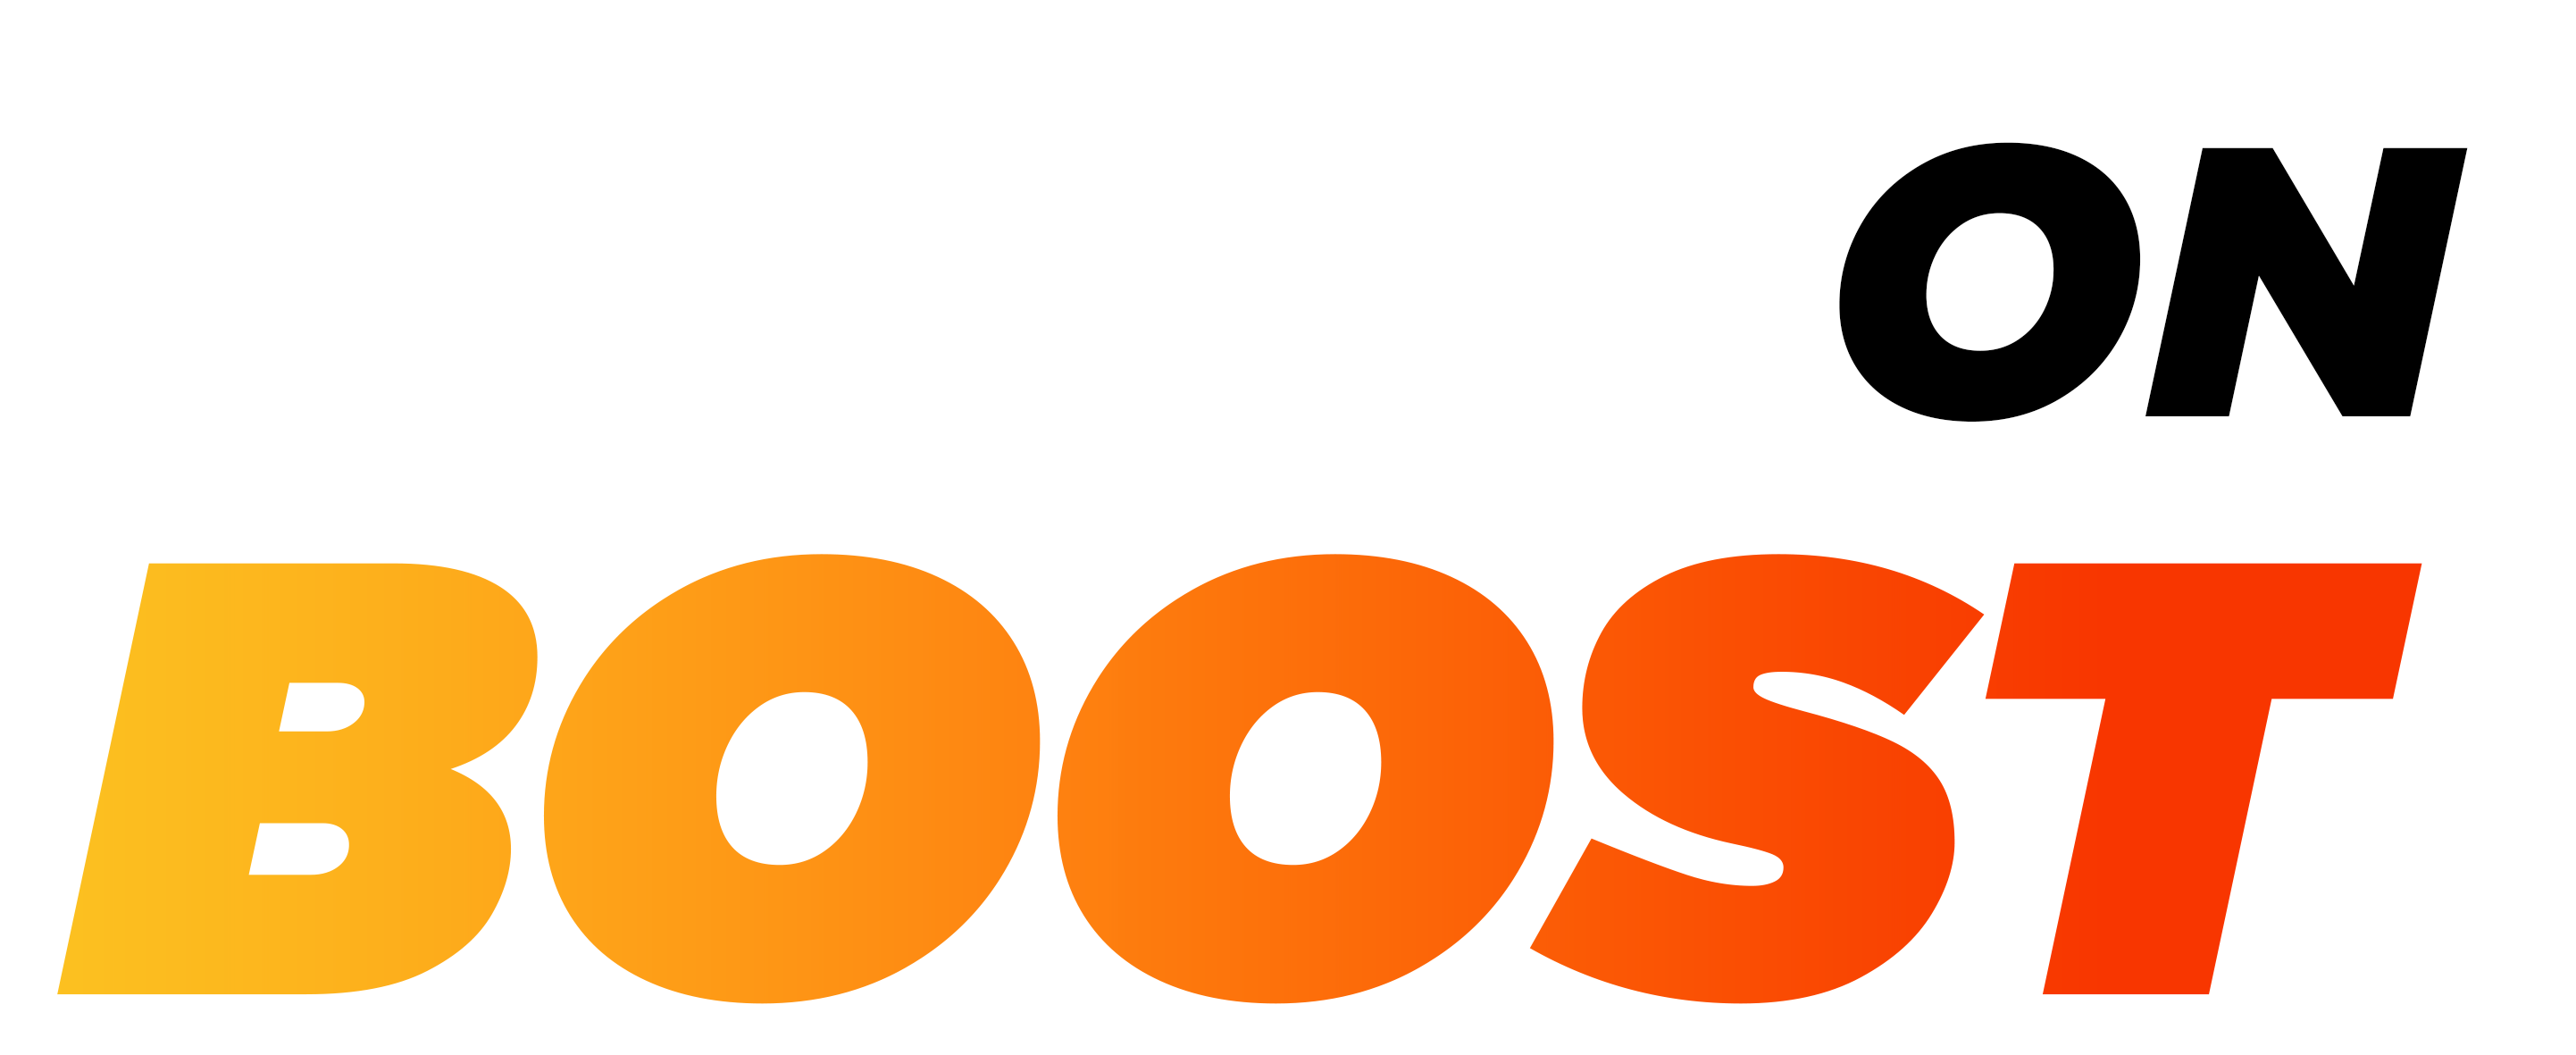 High on Boost